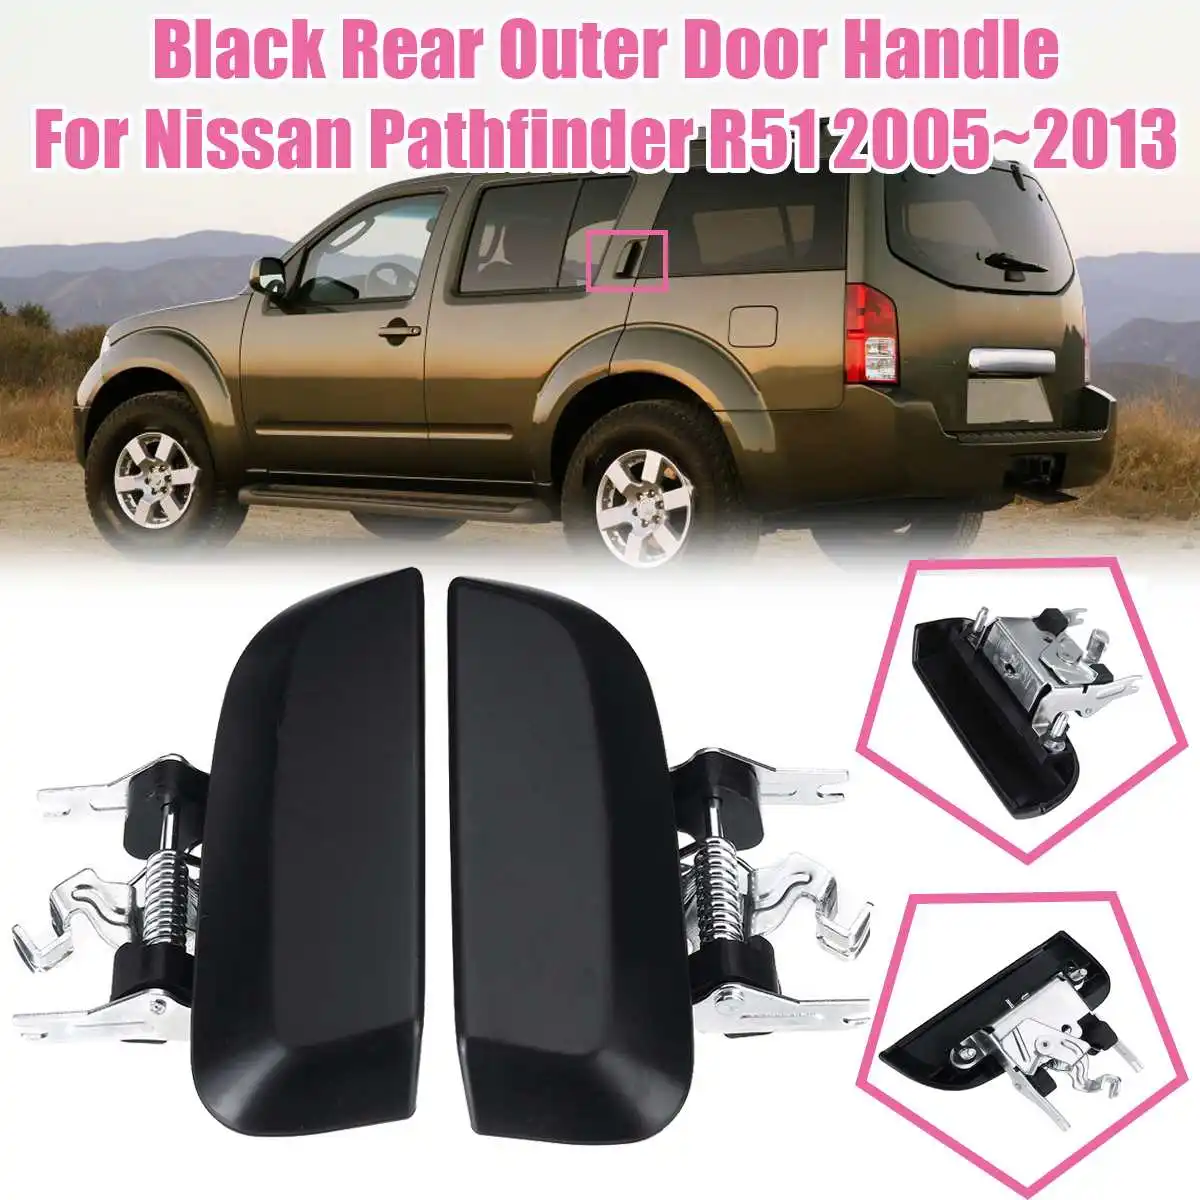 

Black / Chorme Rear Door Outer Handle left / right For Nissan Pathfinder R51 2005 2006 2007 2008 2009 2010 2011 2012 2013